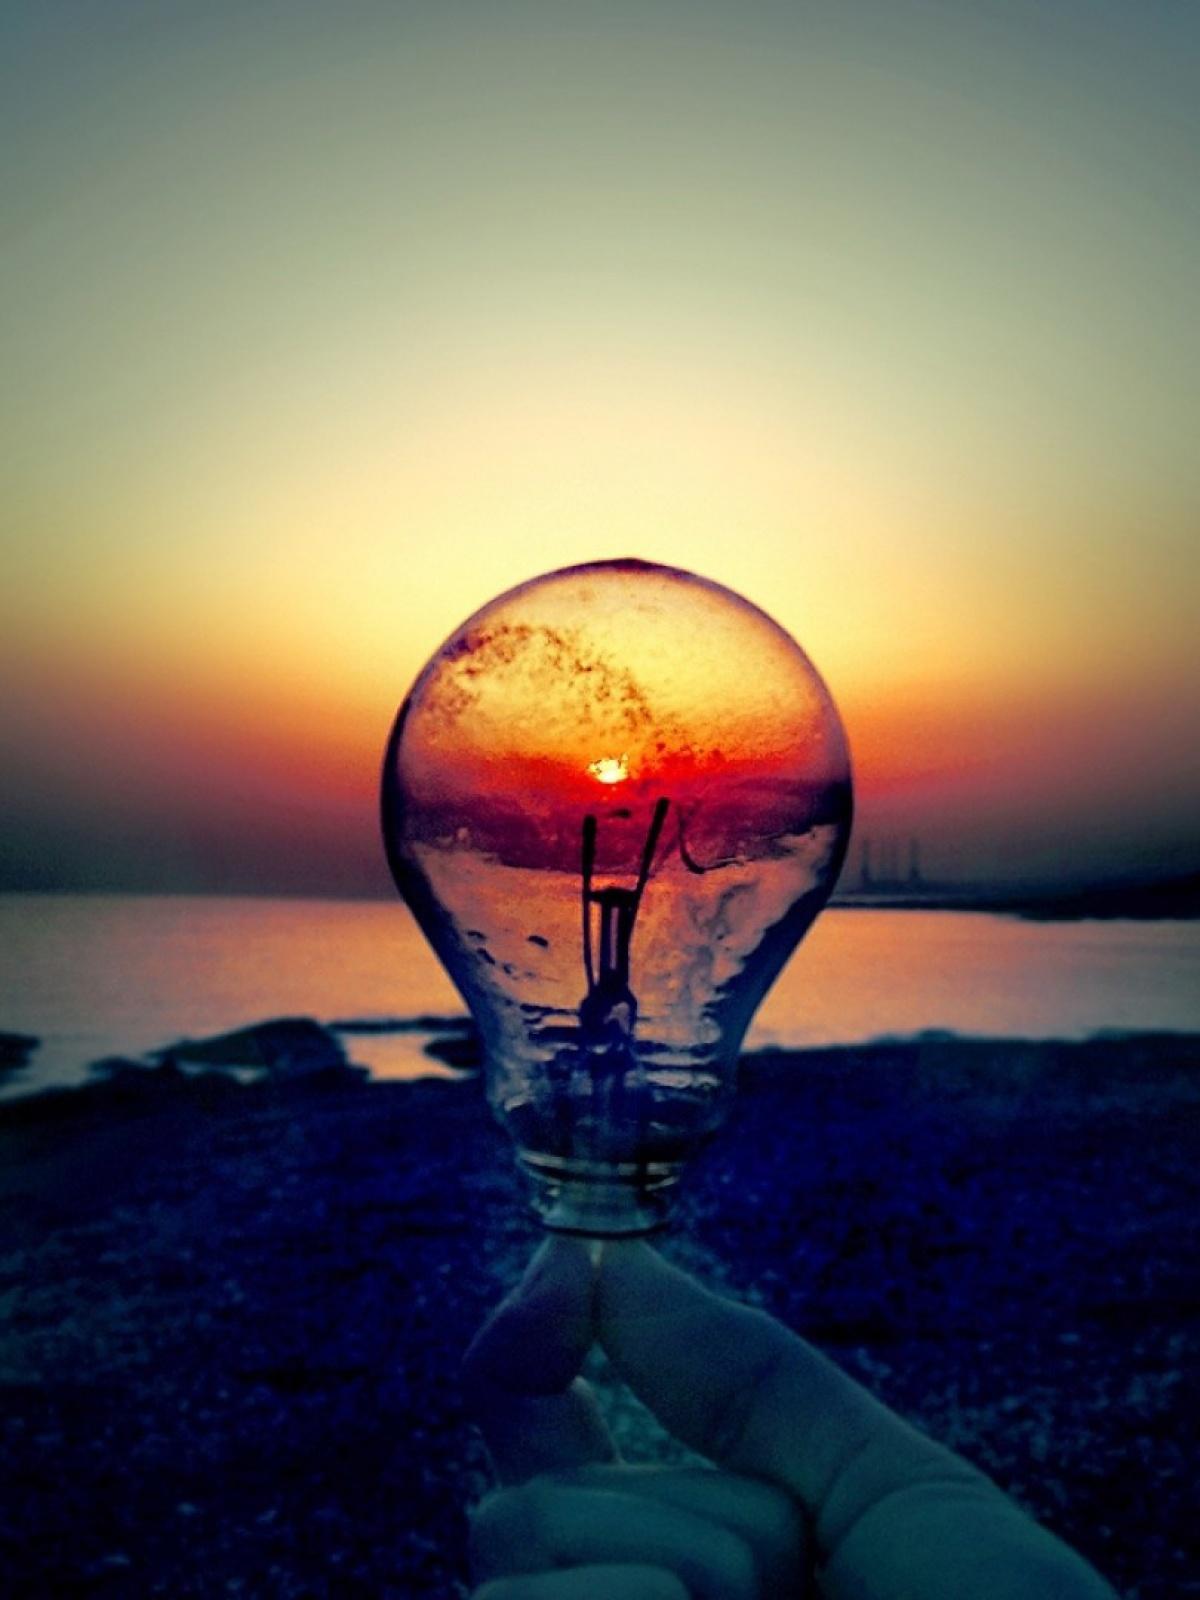 Light Bulb Sunset Beach Android Wallpaper free download